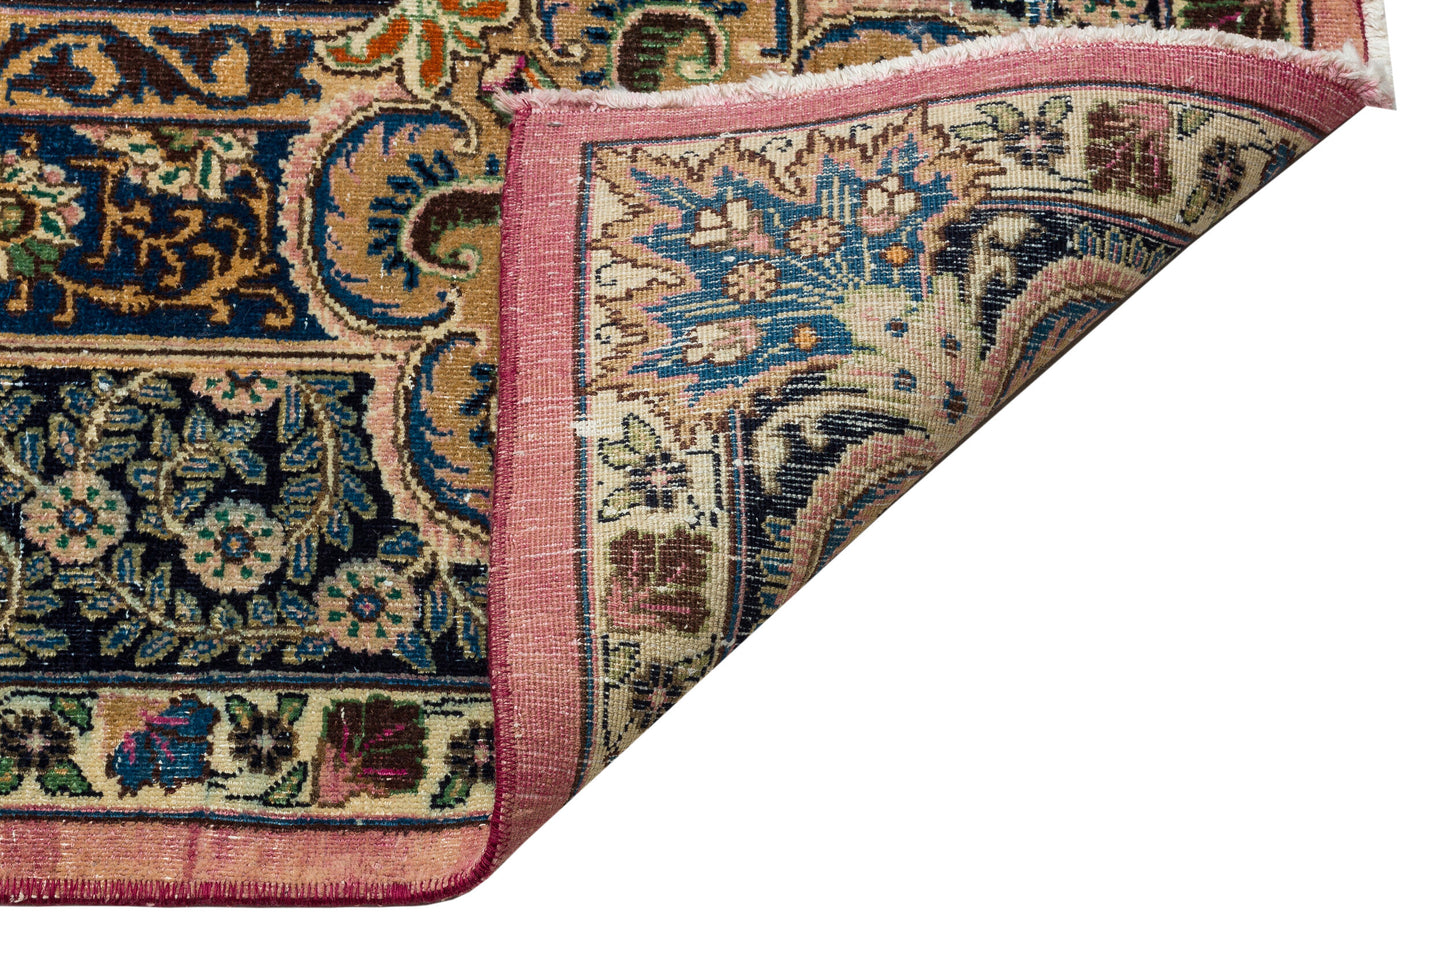 Vintage Rugs by Piginda: Timeless Beauty for Your Home,10'0" x 12'3"